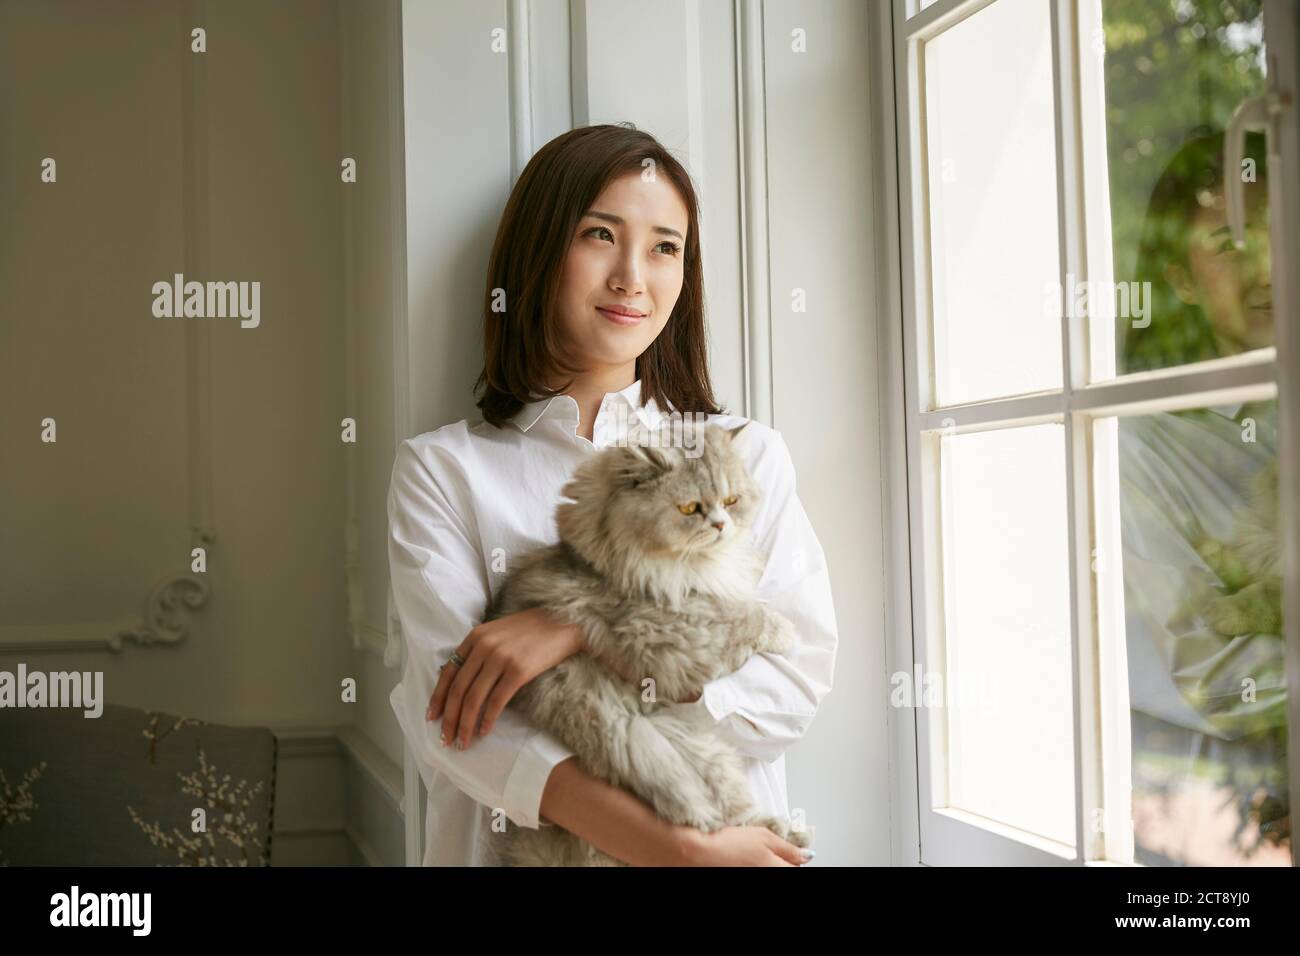 beautiful young asian woman standing by window at home holding a cat in arms looking serene and content Stock Photo